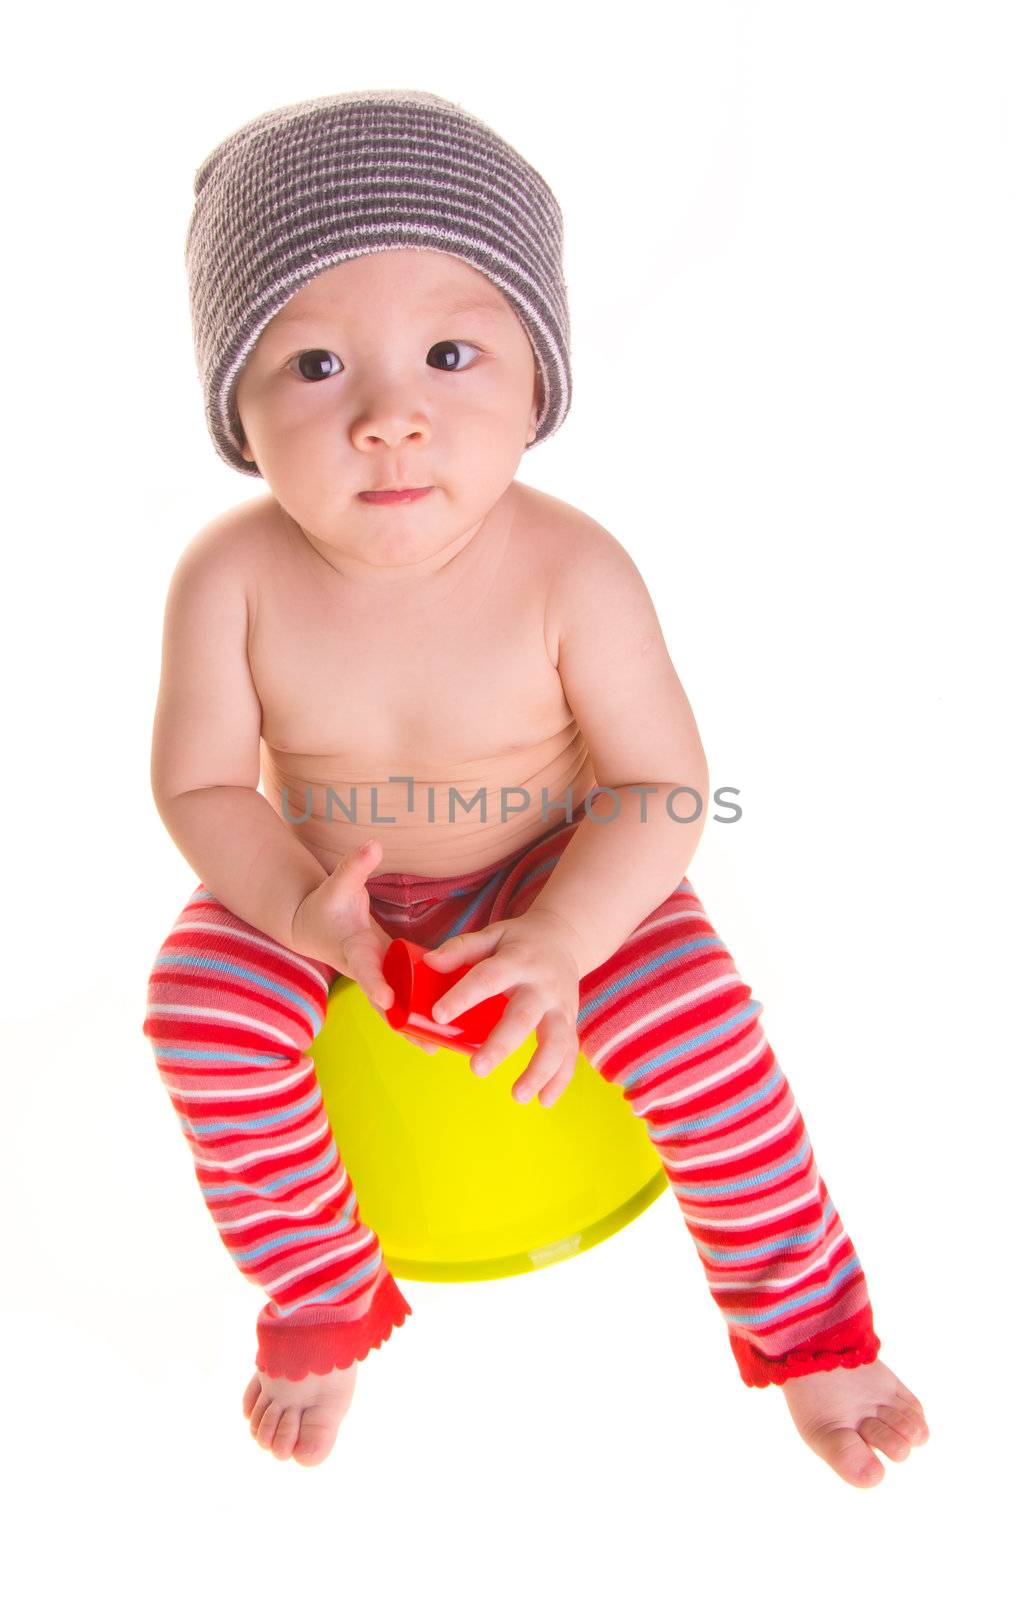 baby, asian baby on chamber-pot